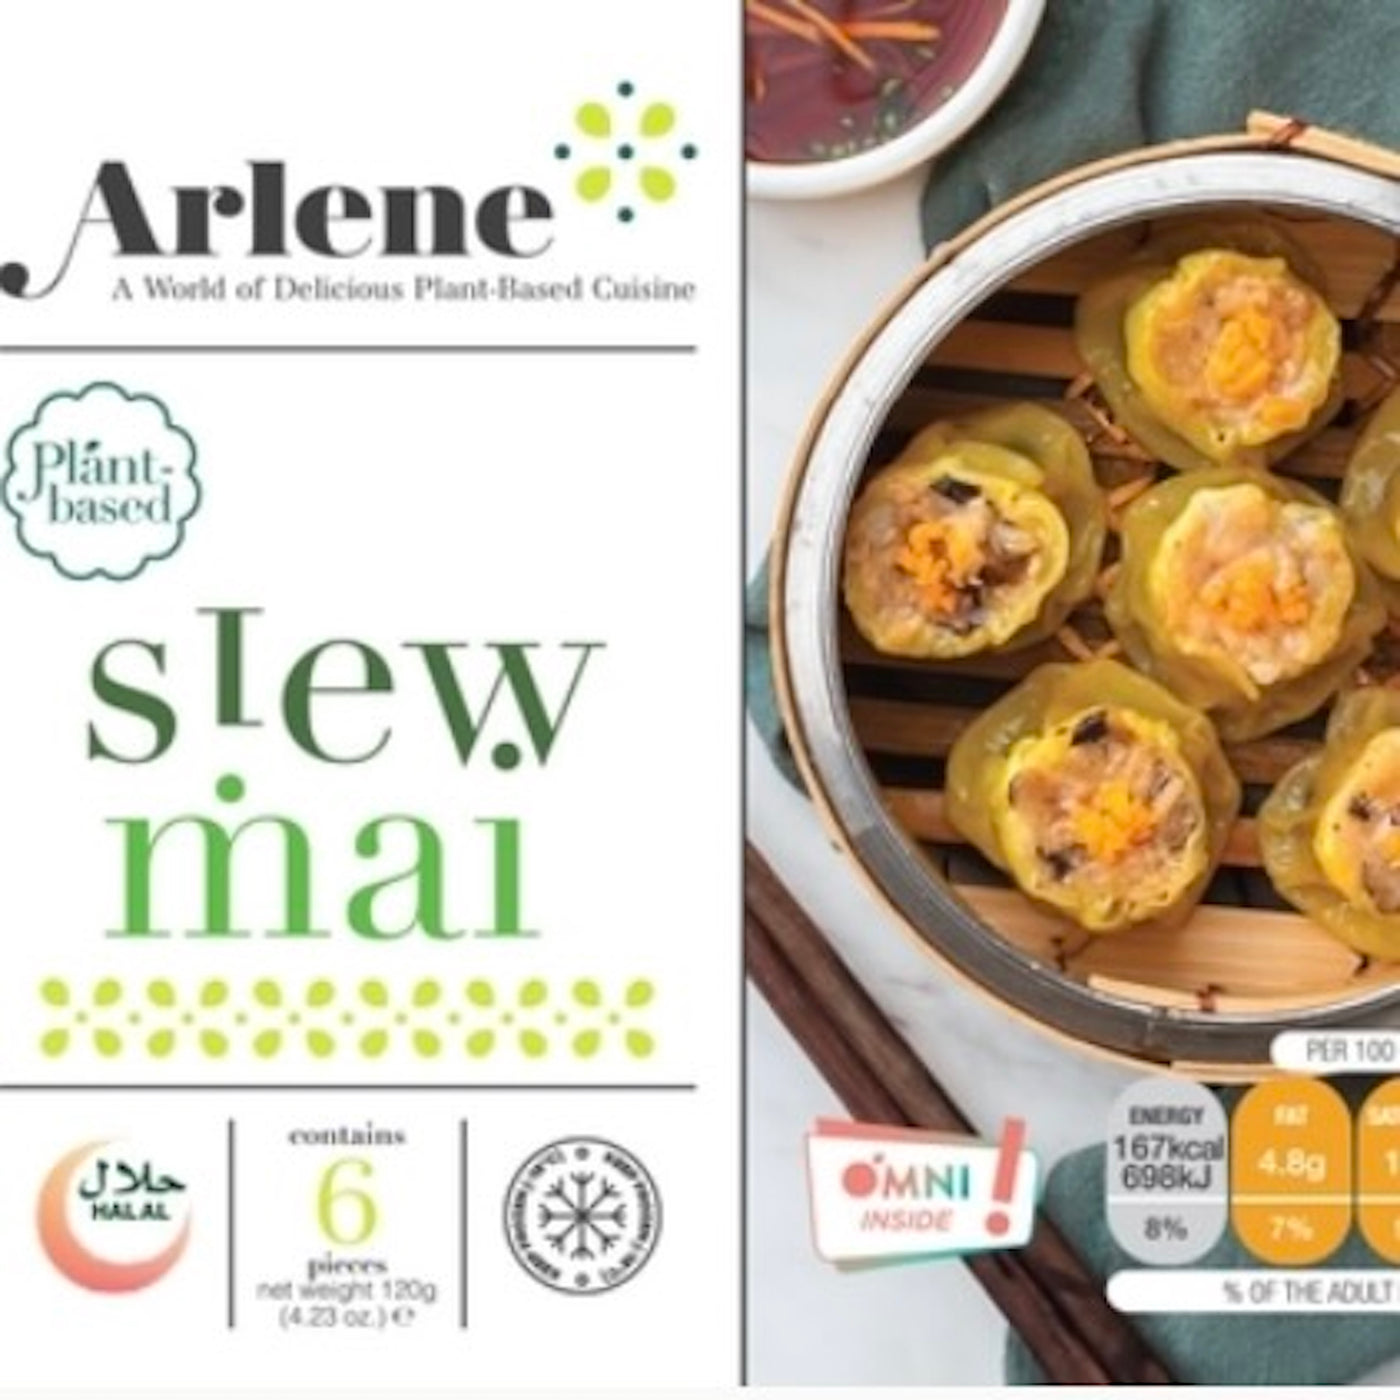 Siew Mai | Plant-based | 6 pieces